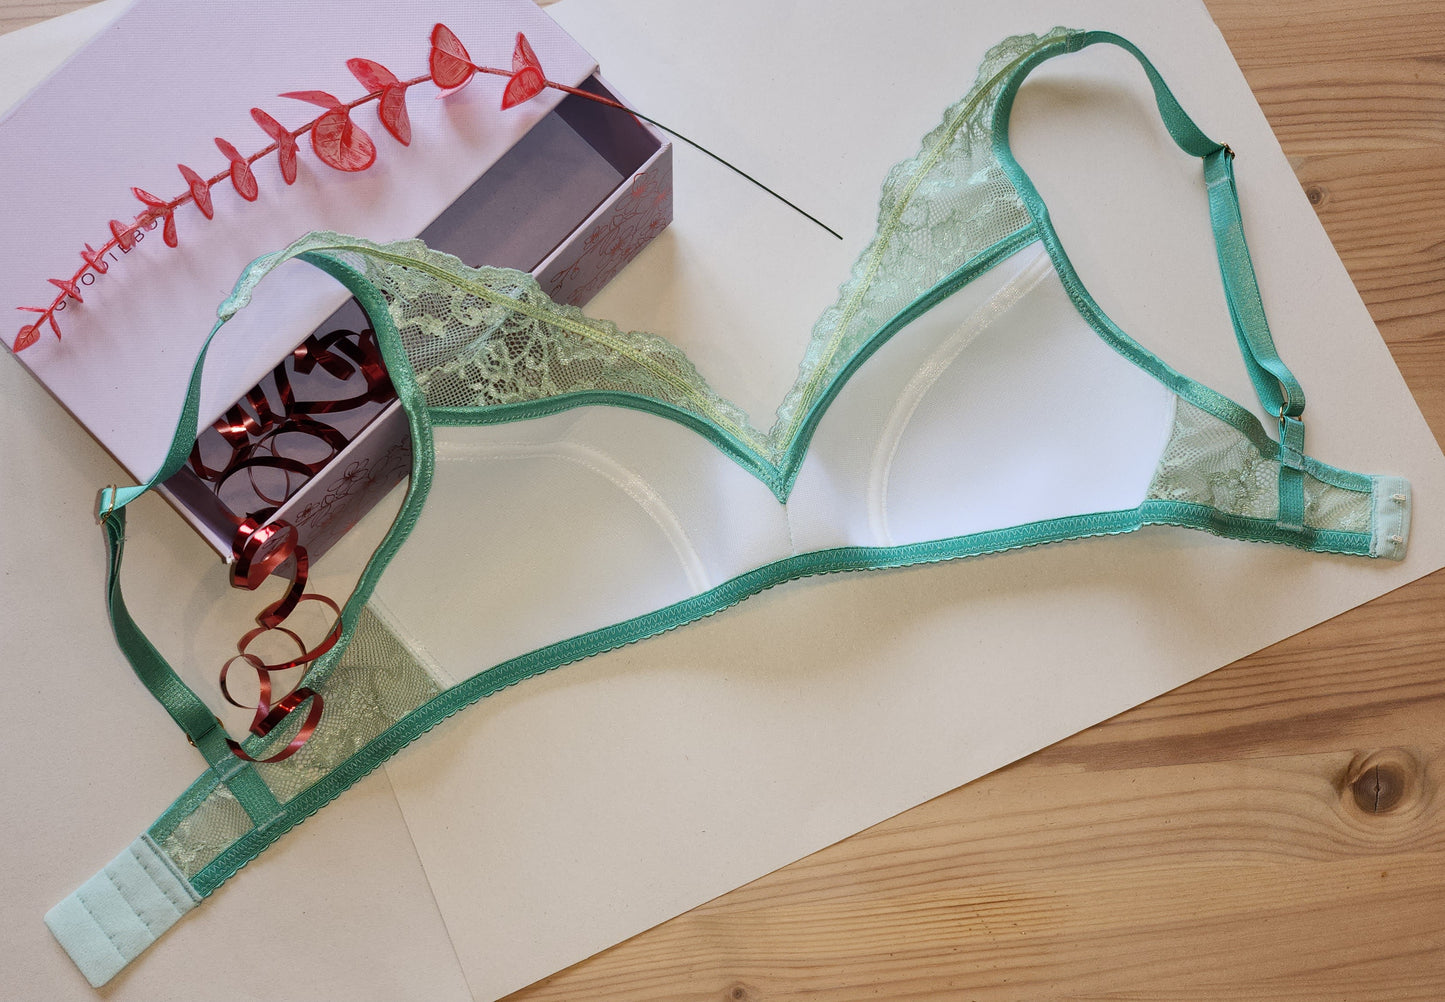 Offer of the month for May. 15% discount will be charged upon checkout. Large sewing set for 2x bras and panties or sewing package with <tc>lace</tc>, microfiber and Powernet in green. IDnsx1